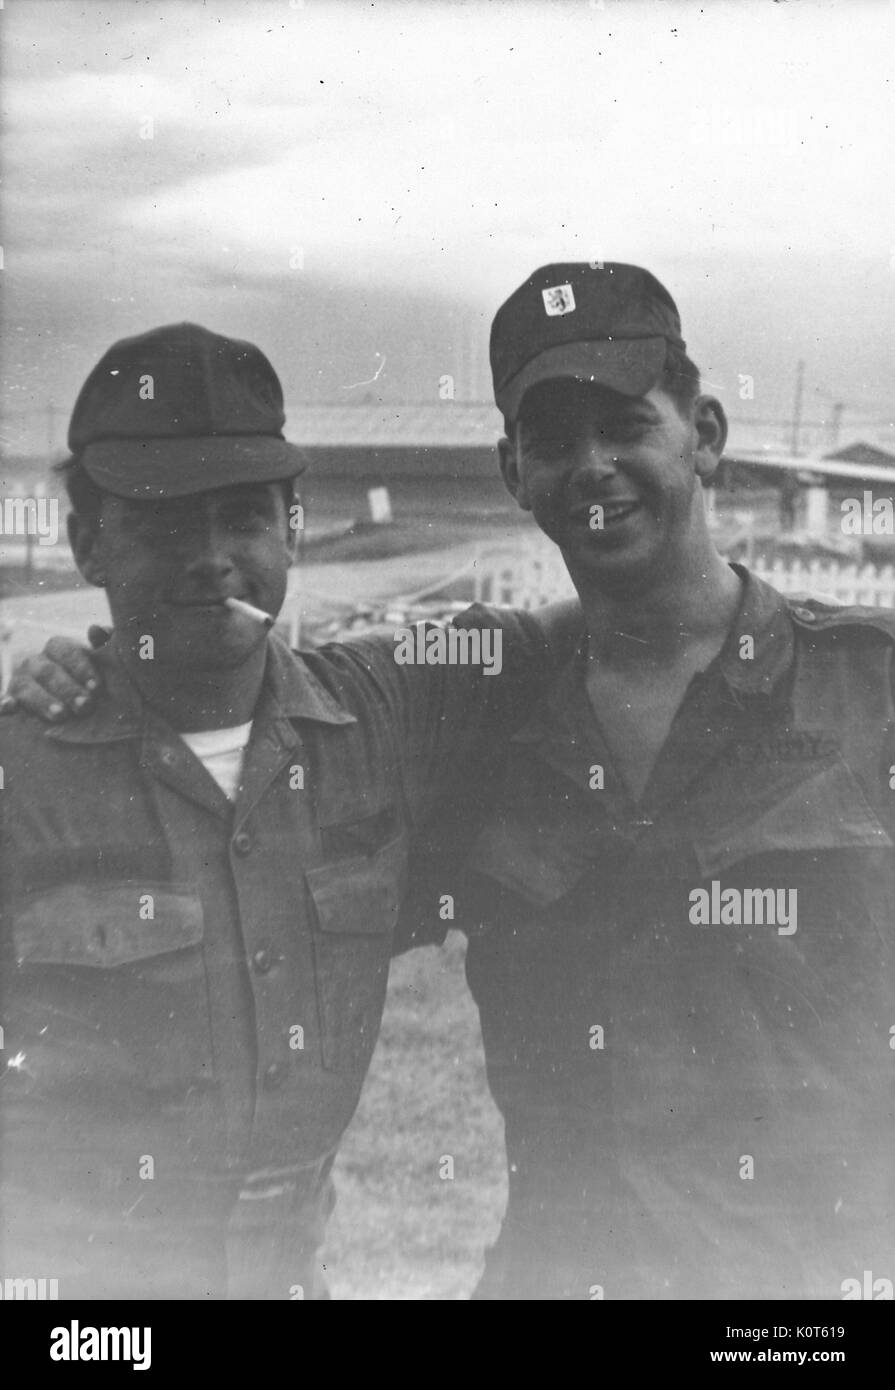 A photograph of two United States Army soldiers posing with their arms around each others shoulders, the serviceman on the left is smoking a cigarette, a portion of the base case be seen in the background, Vietnam, 1967. Stock Photo